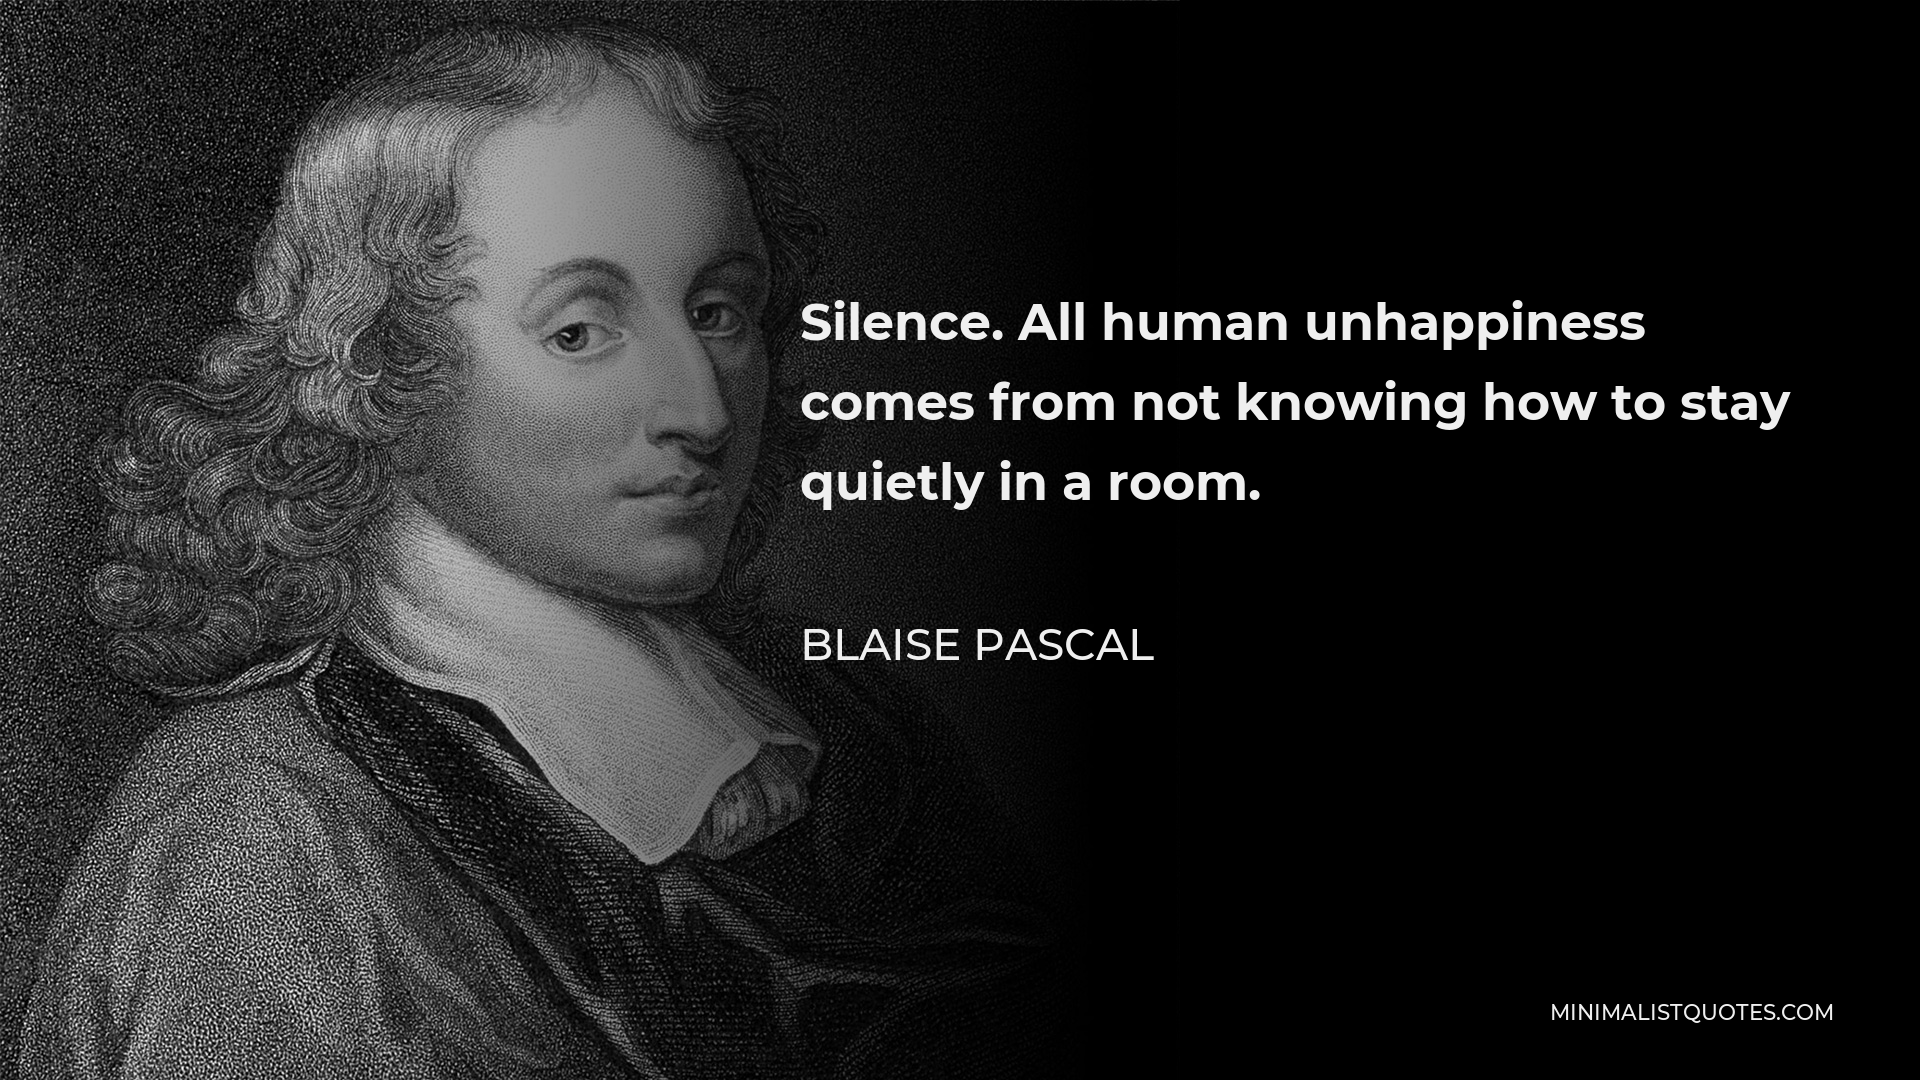 Blaise Pascal Quote - Silence. All human unhappiness comes from not knowing how to stay quietly in a room.